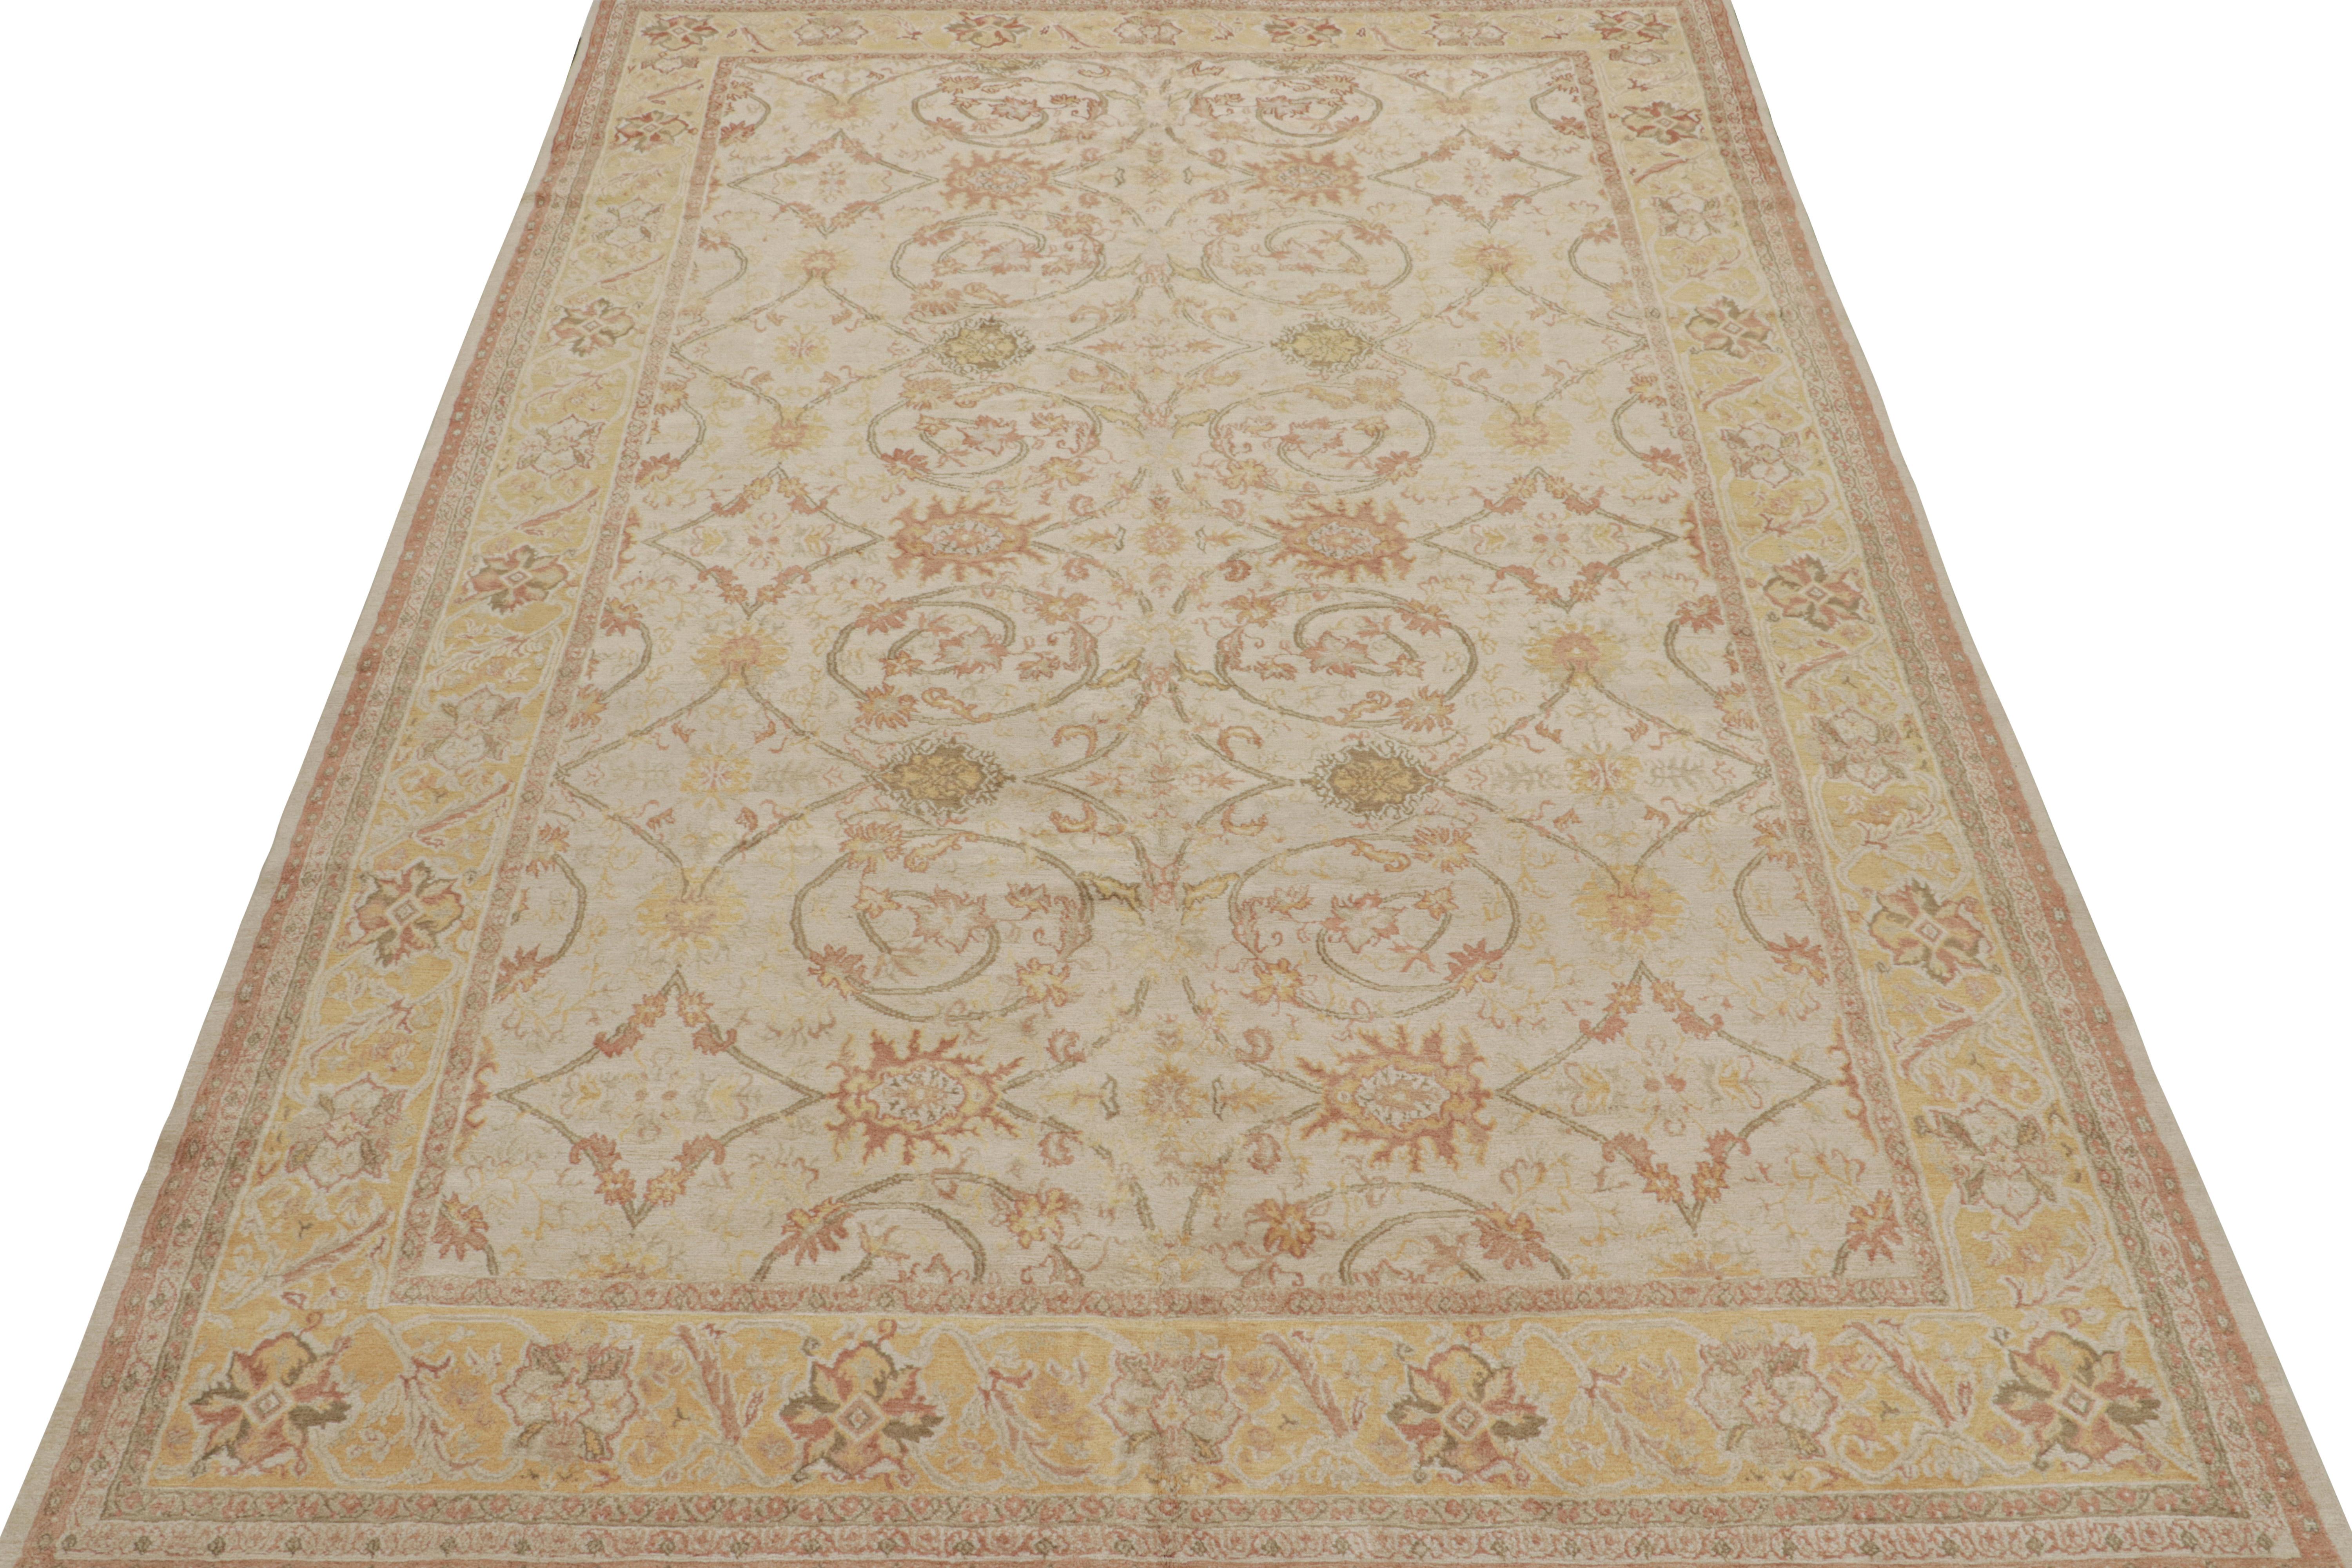 Hand-Knotted Rug & Kilim’s Sultanabad style rug in Cream with Floral Patterns For Sale